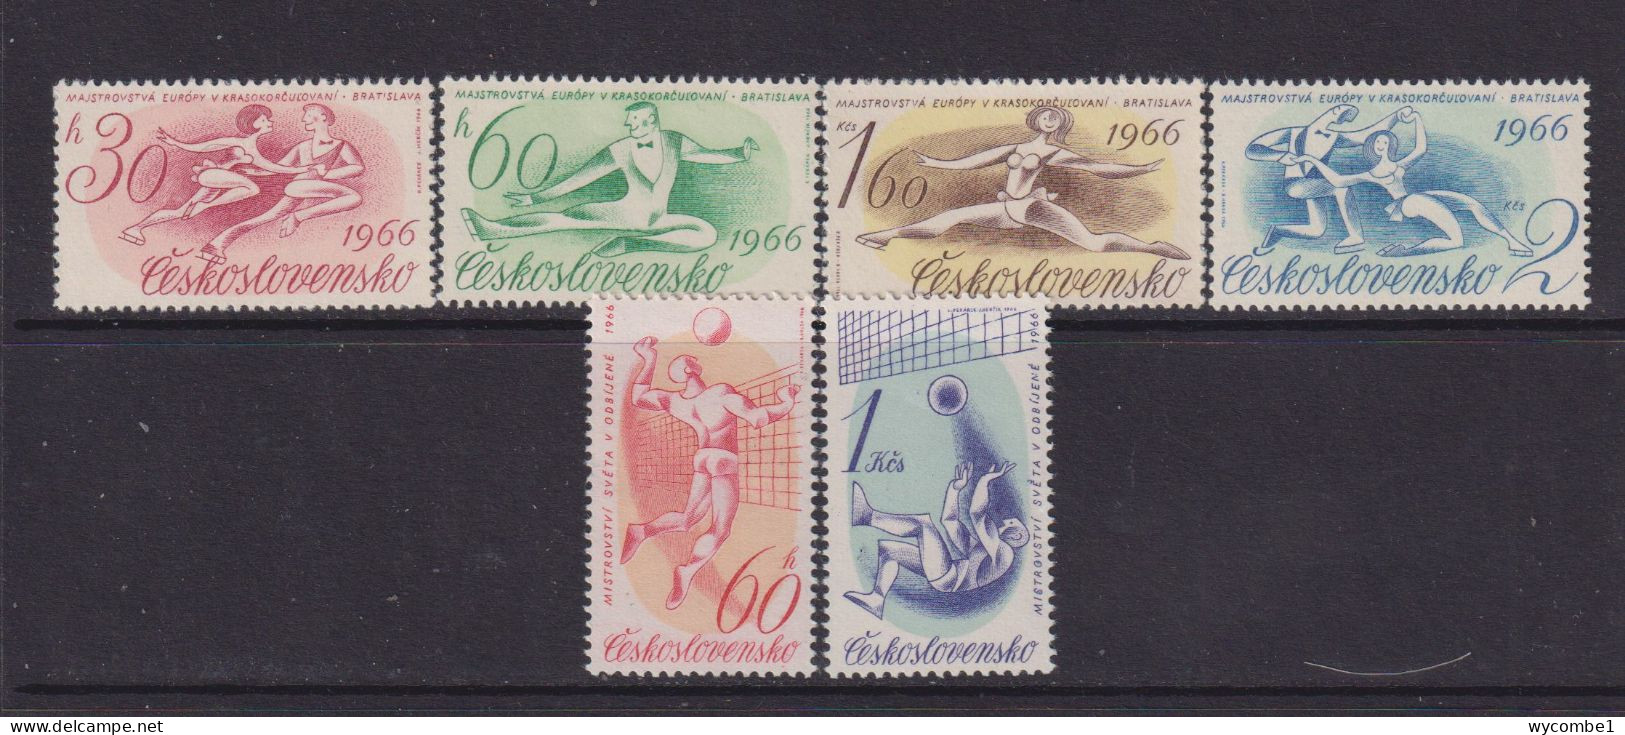 CZECHOSLOVAKIA  - 1966 Sports Events Set Never Hinged Mint - Unused Stamps